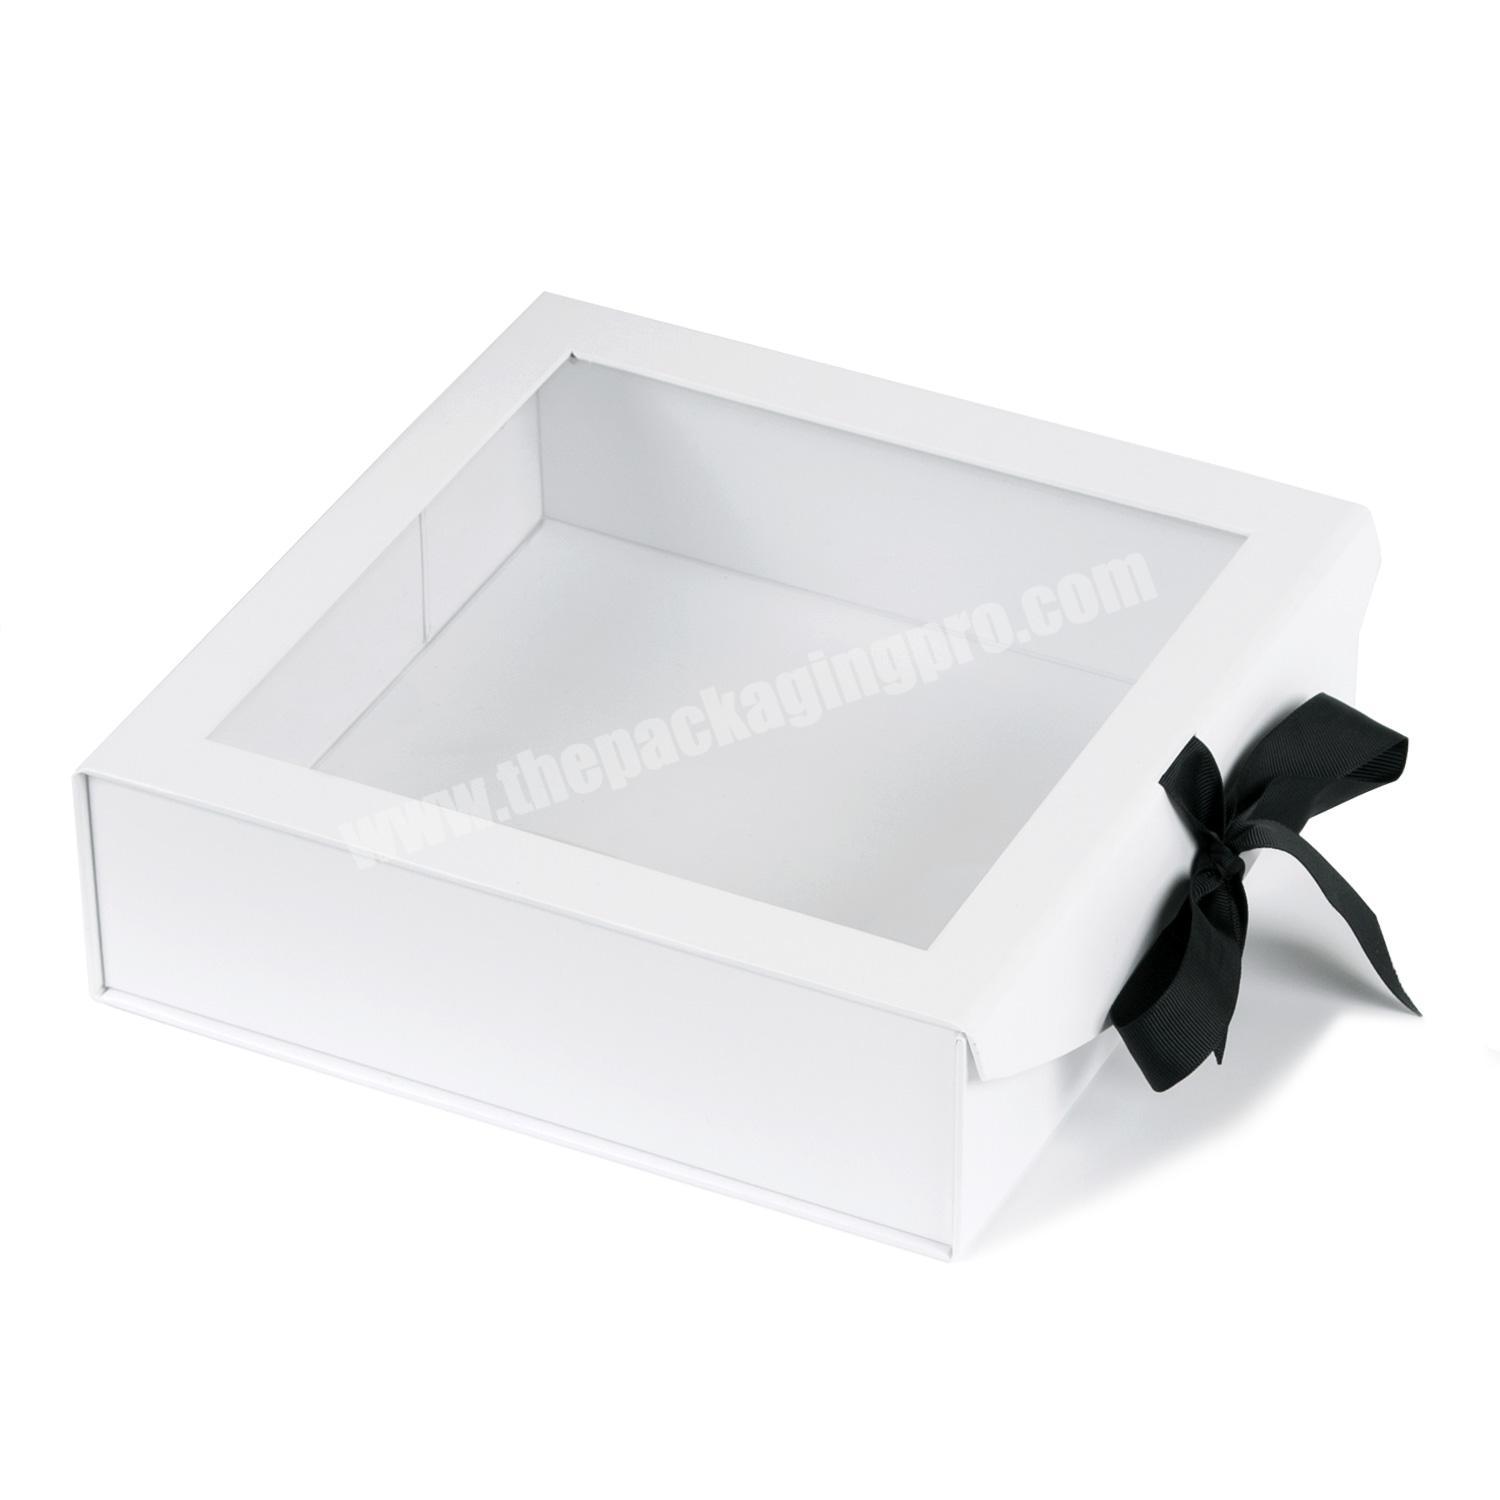 Luxury Plain White Gift Box Packaging, Ribbon Closure Magnetic Folding Box with Clear Window